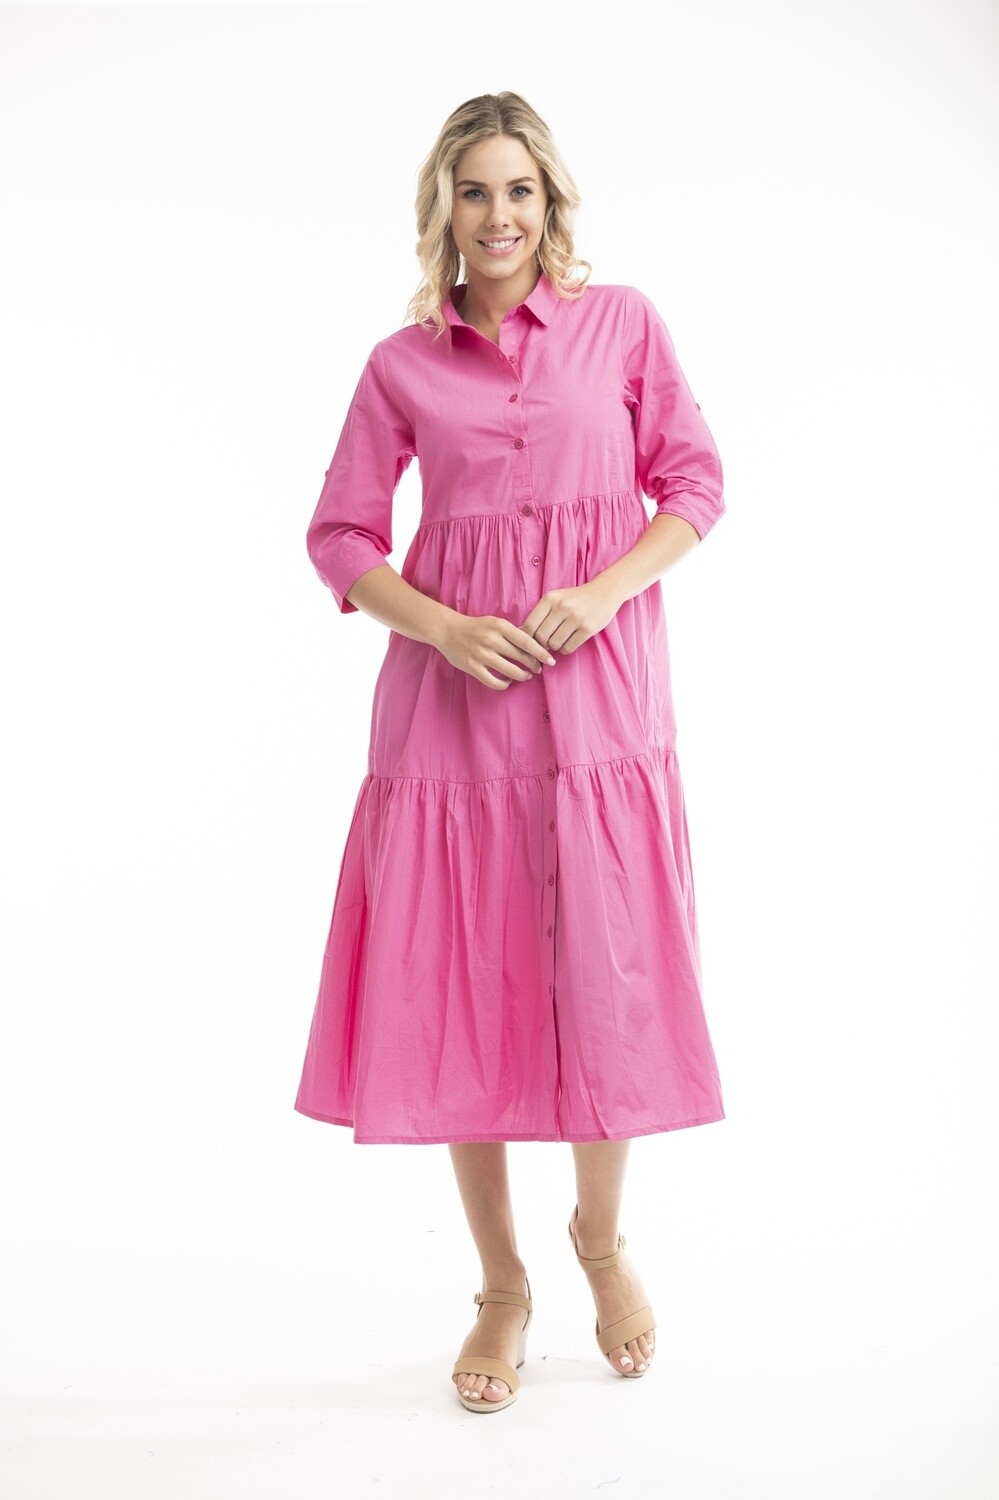 Essentials Dress Layered 3/4 Sleeve, Colour: Rose, Size: 8